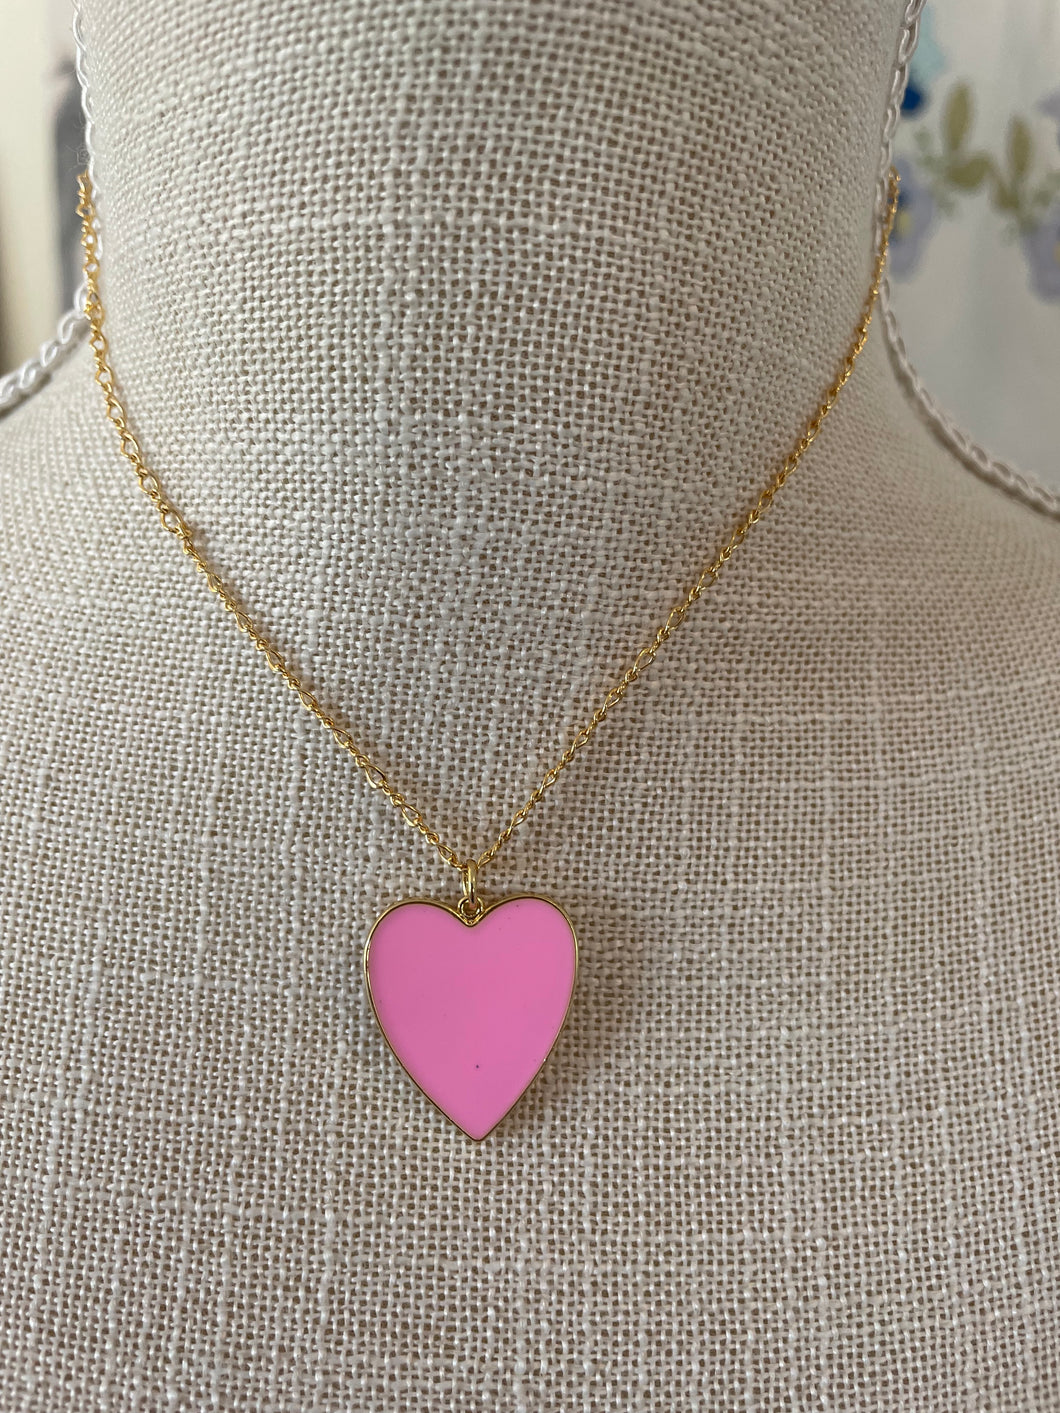 Mitylene Gold Chain Necklace with Large Bright Pink Heart Pendant